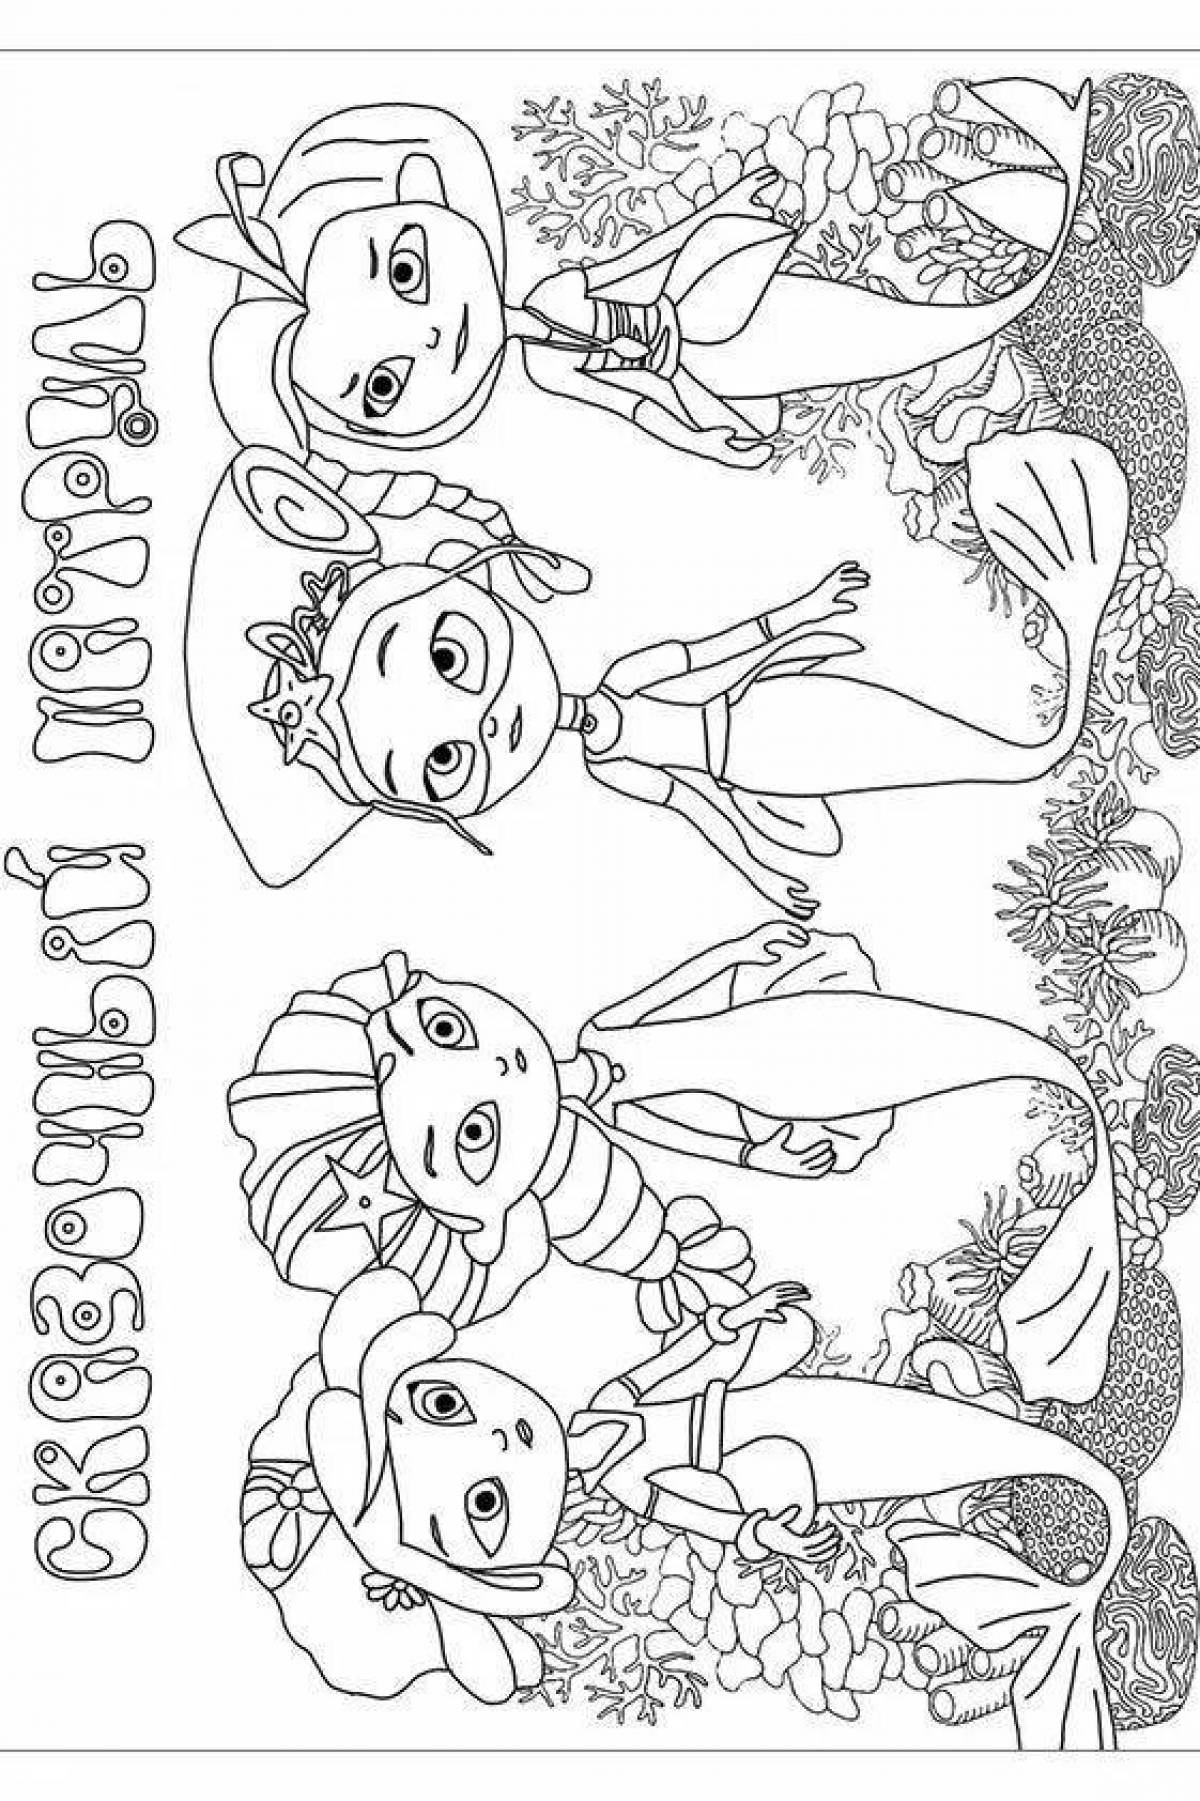 Luminous coloring page turn on the fairy patrol